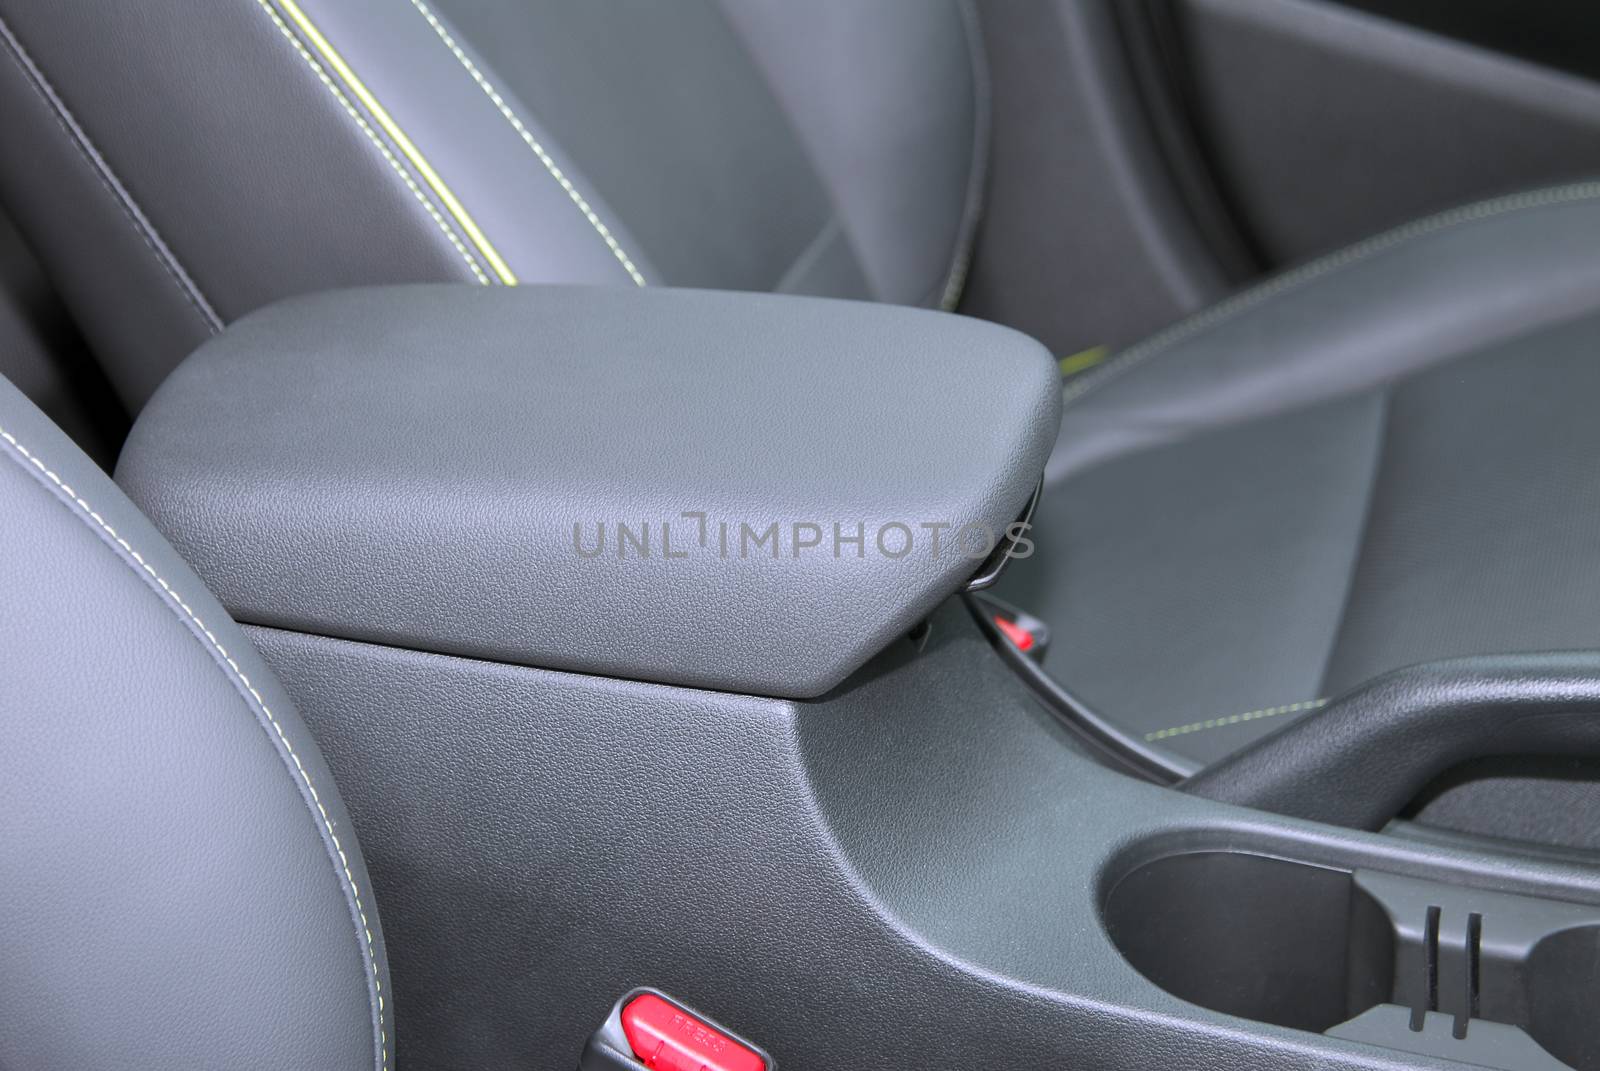 armrest in the luxury passenger car between the front seats by aselsa